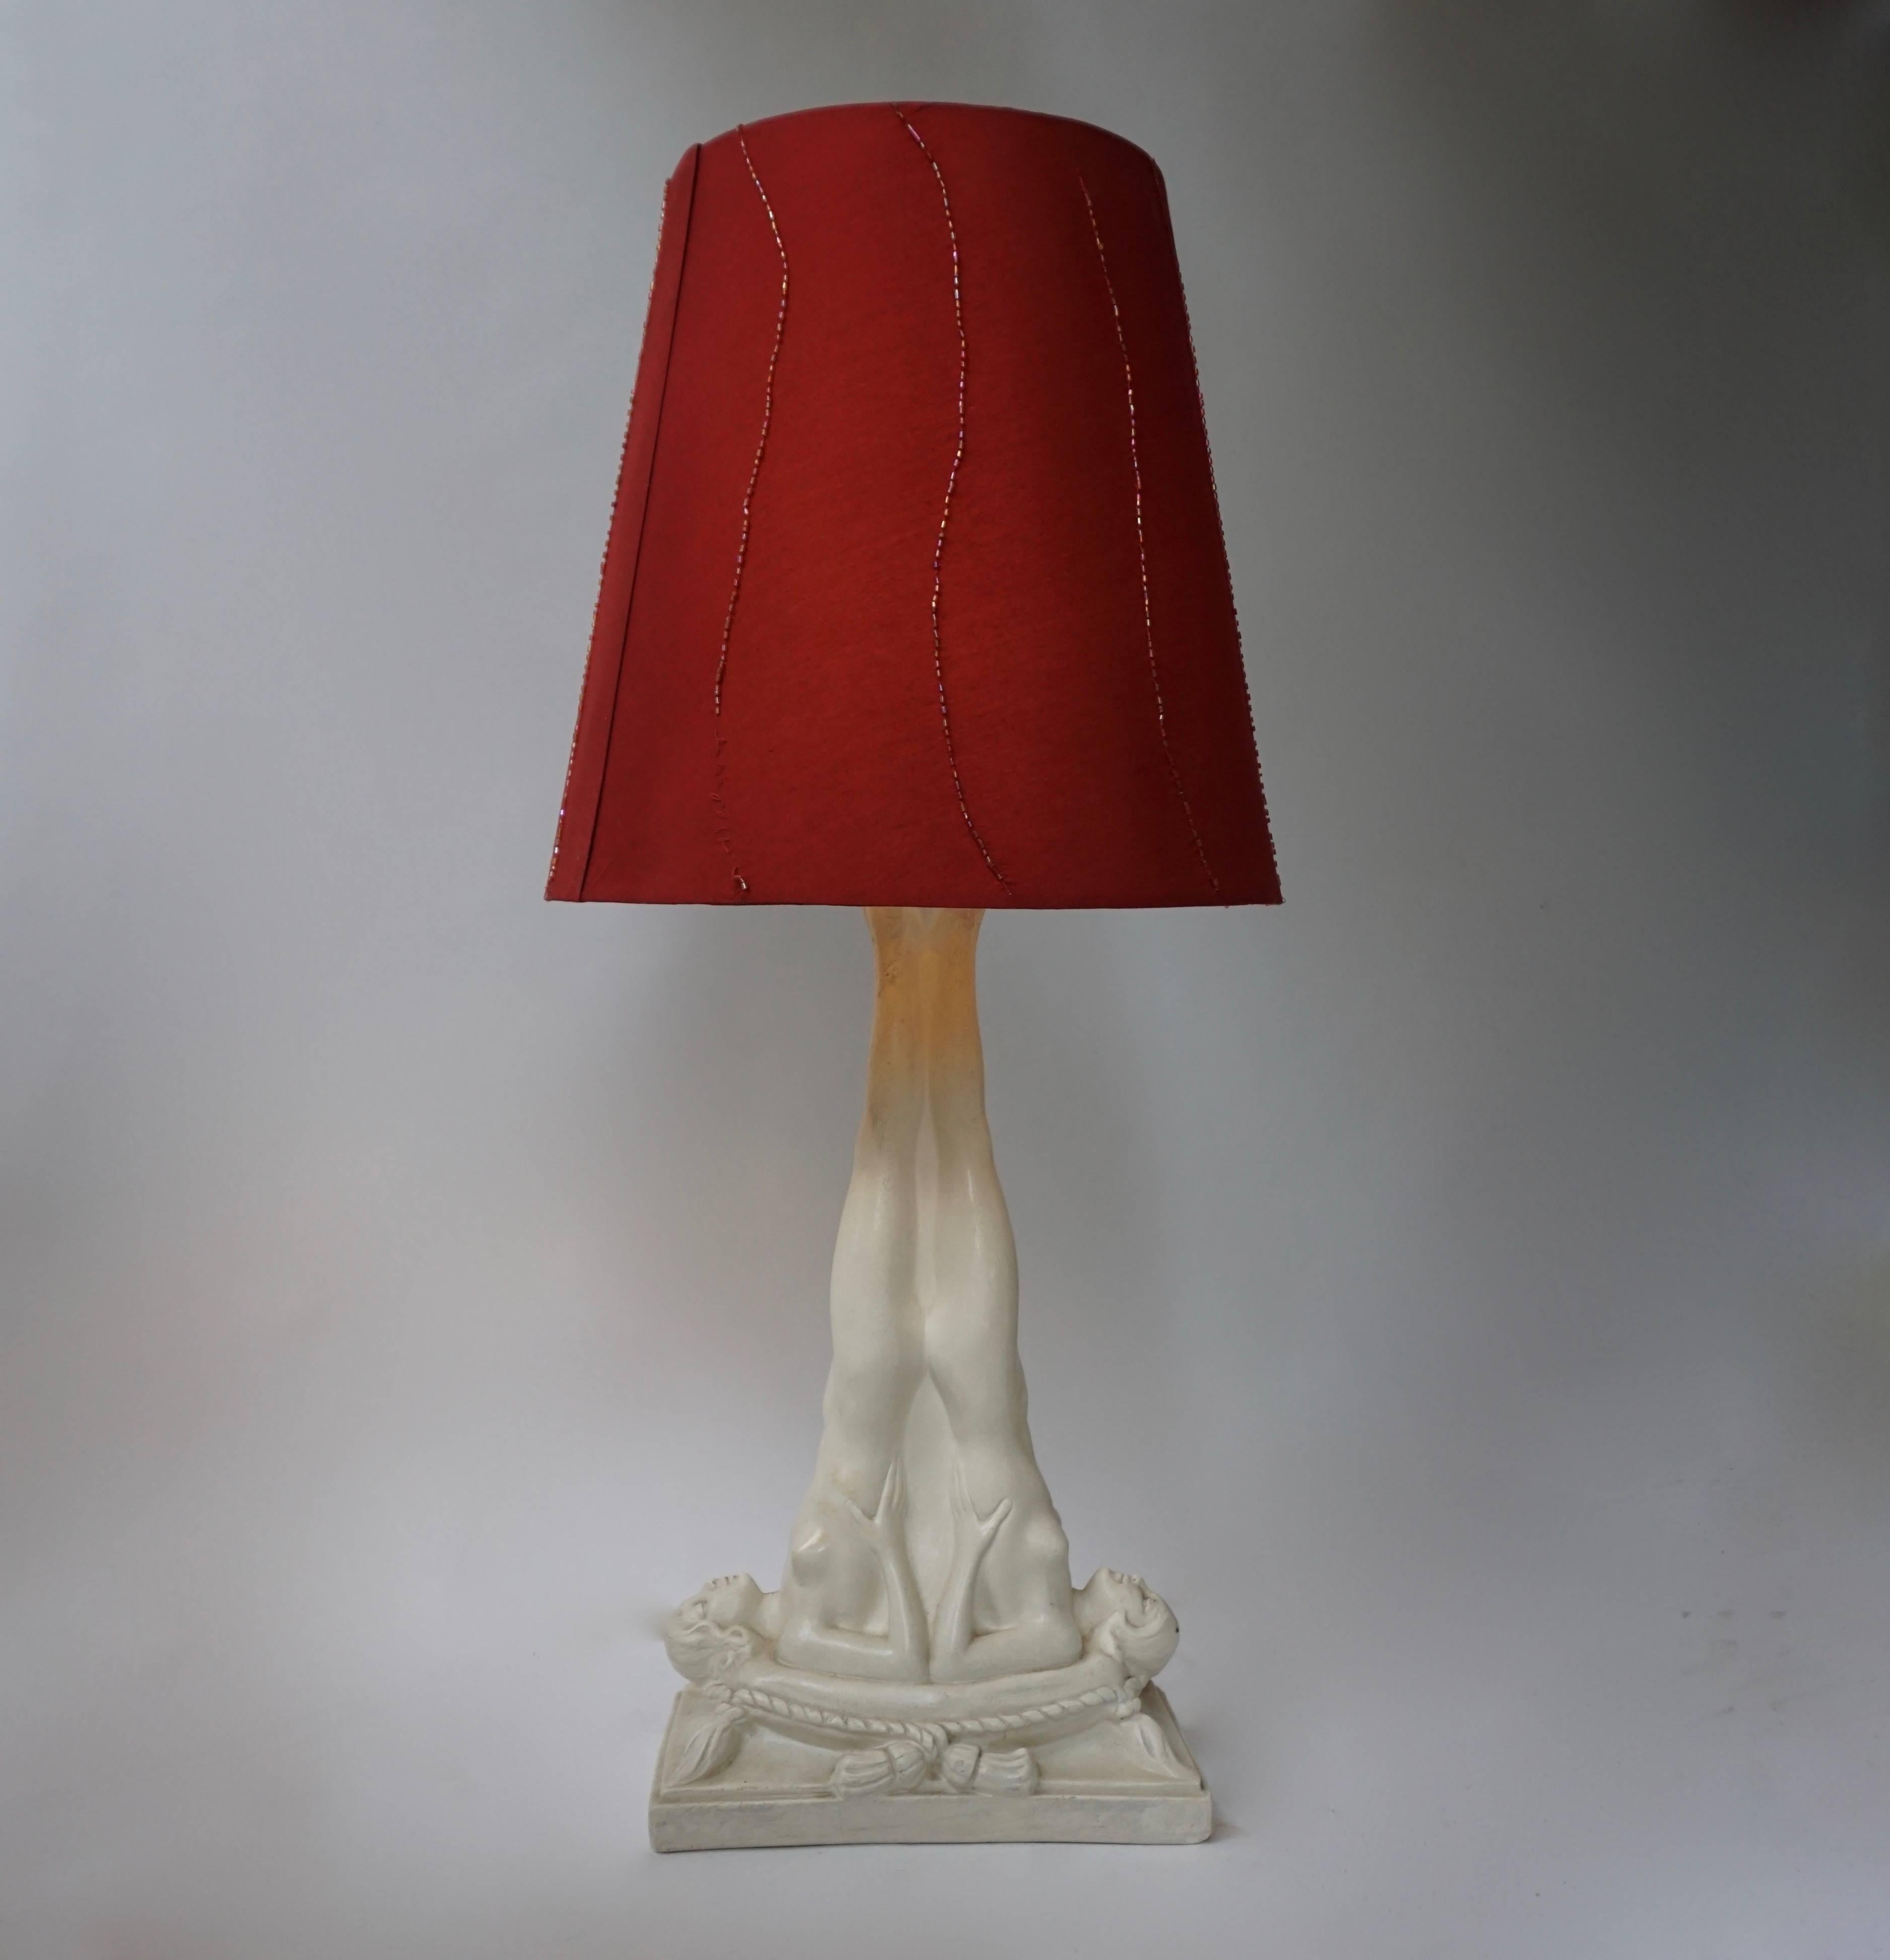 Table lamp in plaster.
Measures: Height 53 cm.
Width 25 cm.
Depth 14.

Shade is not included in the price.